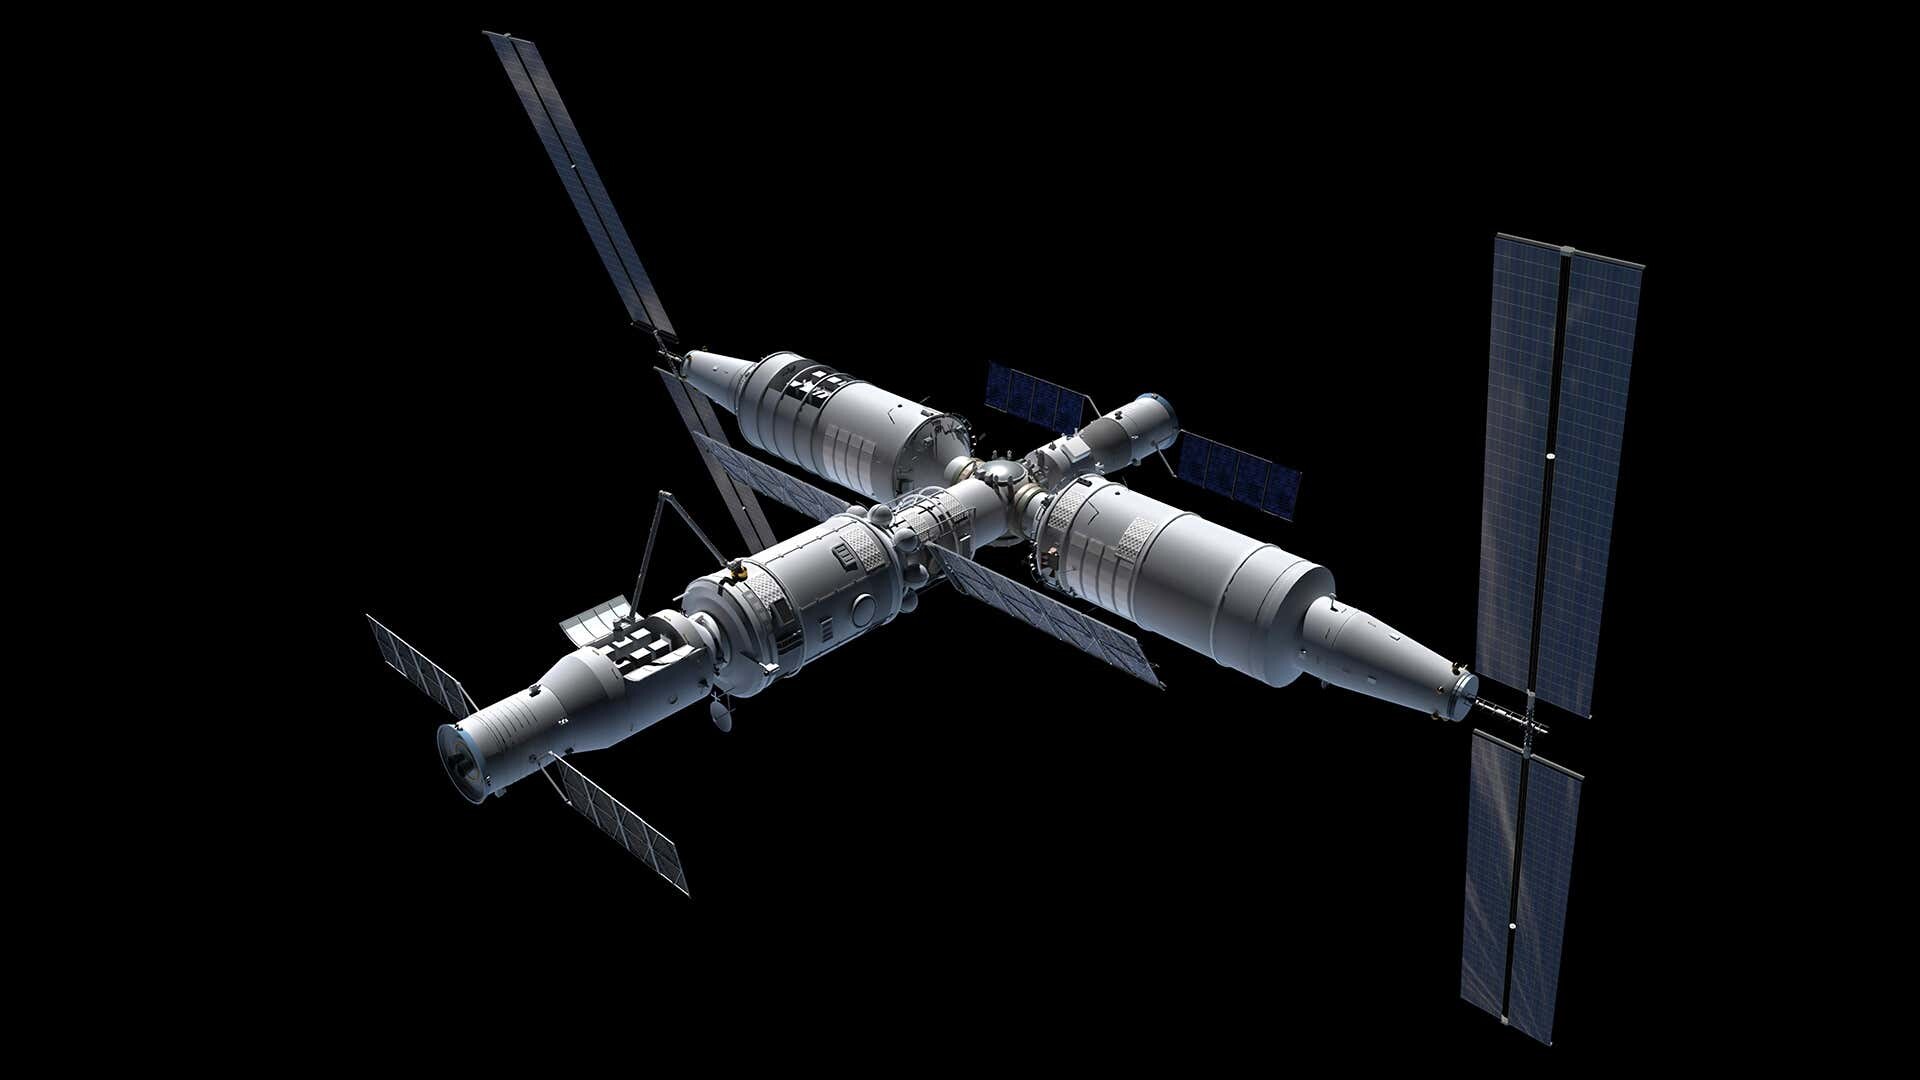 Tiangong Space Station: Consist of Tianhe, Wentian, and Mengtian modules, Astronomy. 1920x1080 Full HD Background.